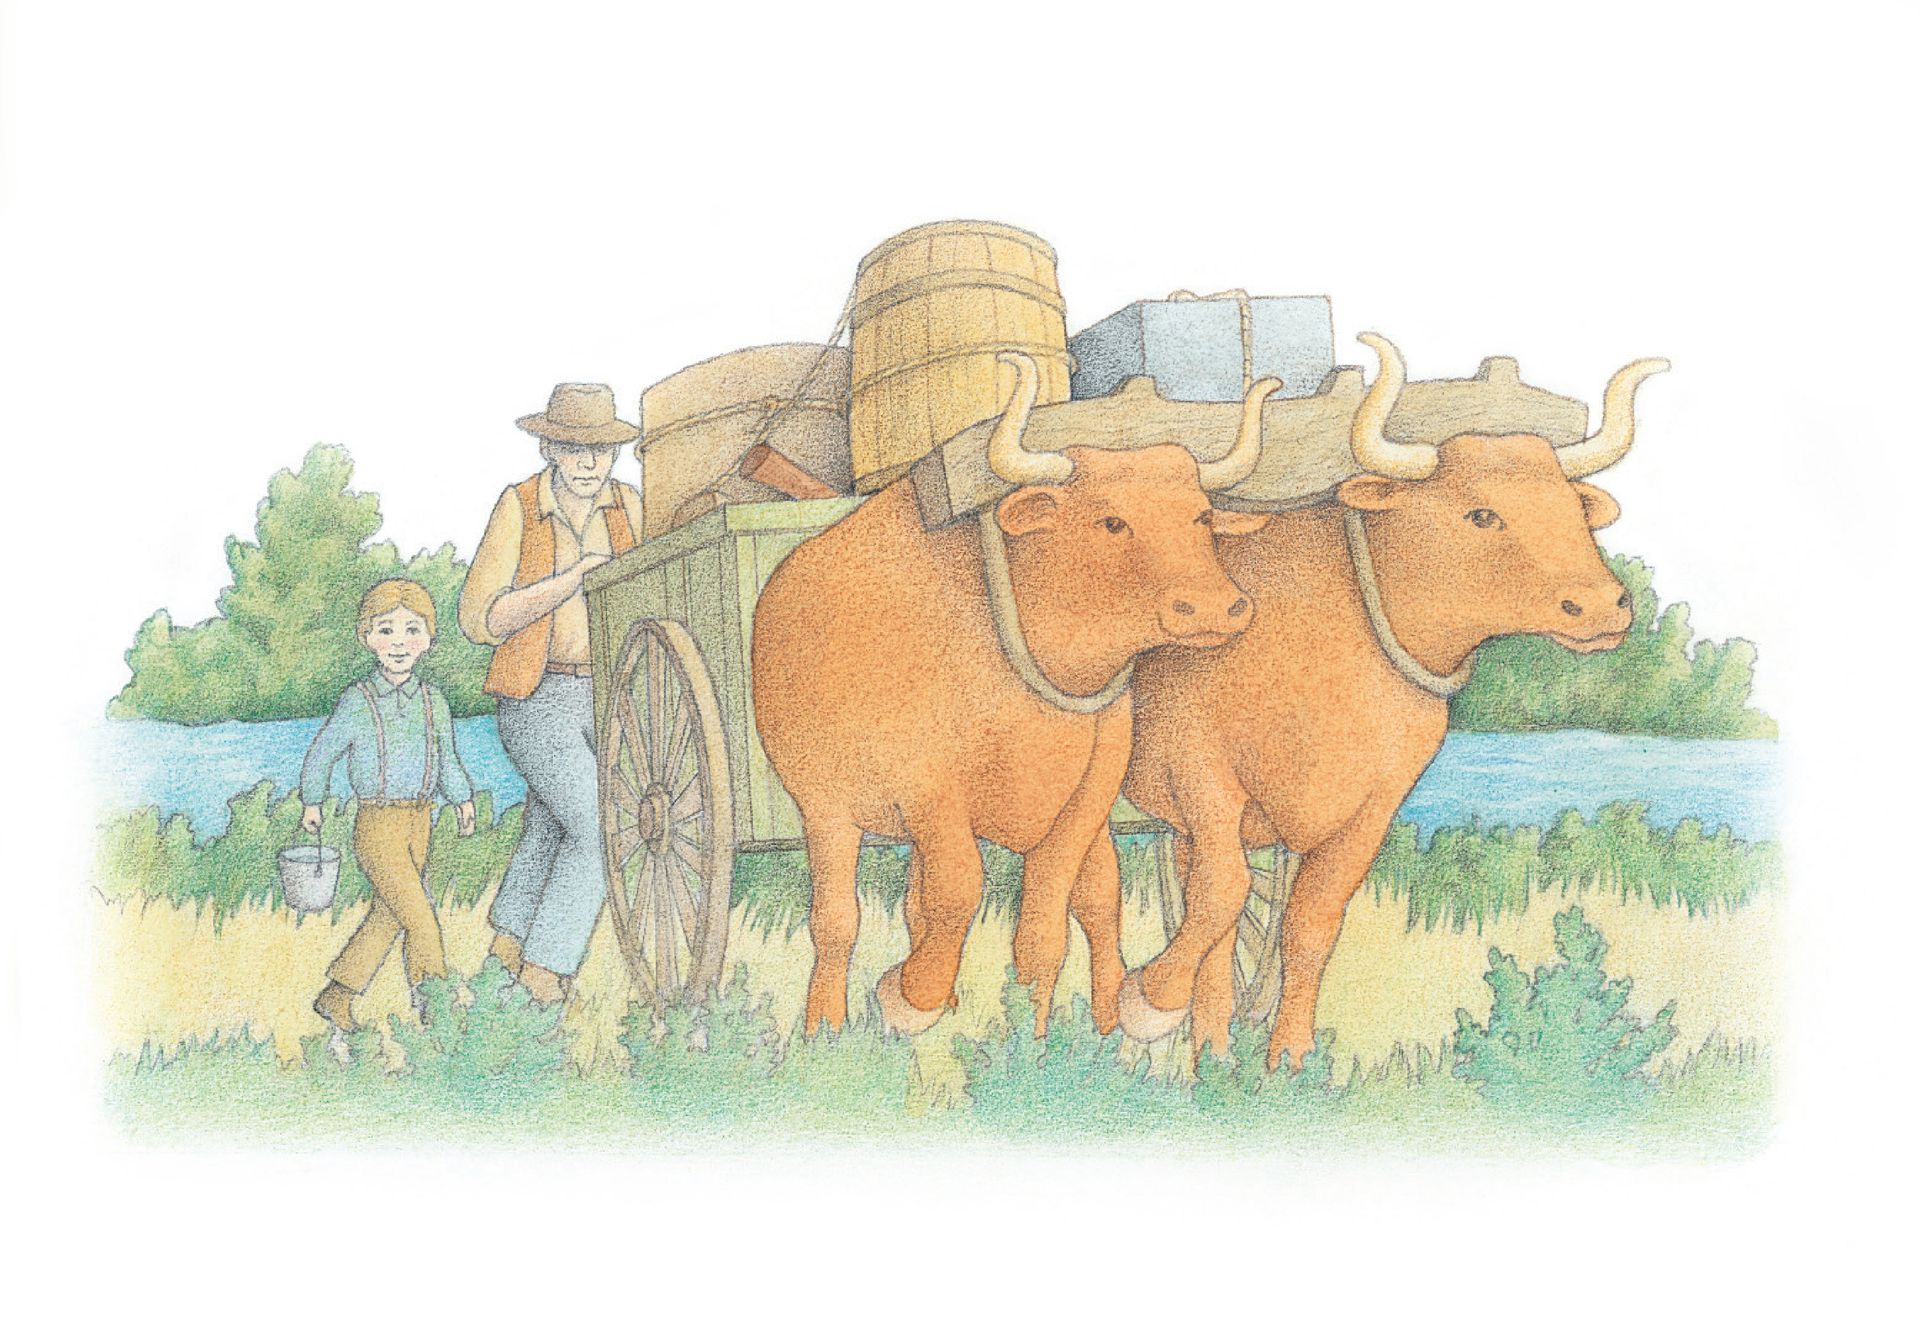 Two oxen pulling an oxcart near a river. From the Children’s Songbook, page 219, “The Oxcart”; watercolor illustration by Beth Whittaker.